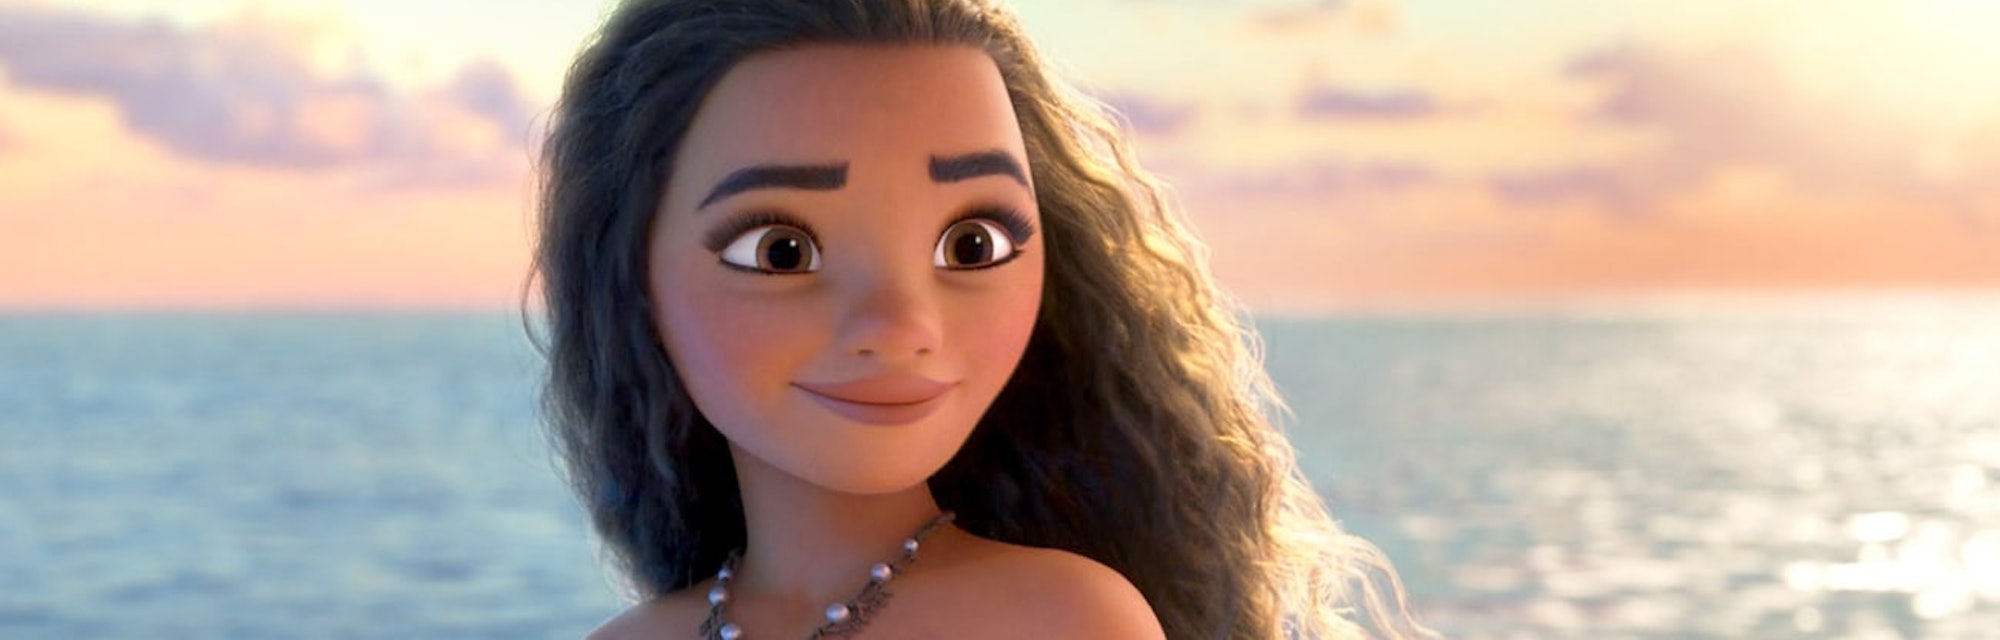 'Moana' is just one of many great feminist movies to watch with your kids.